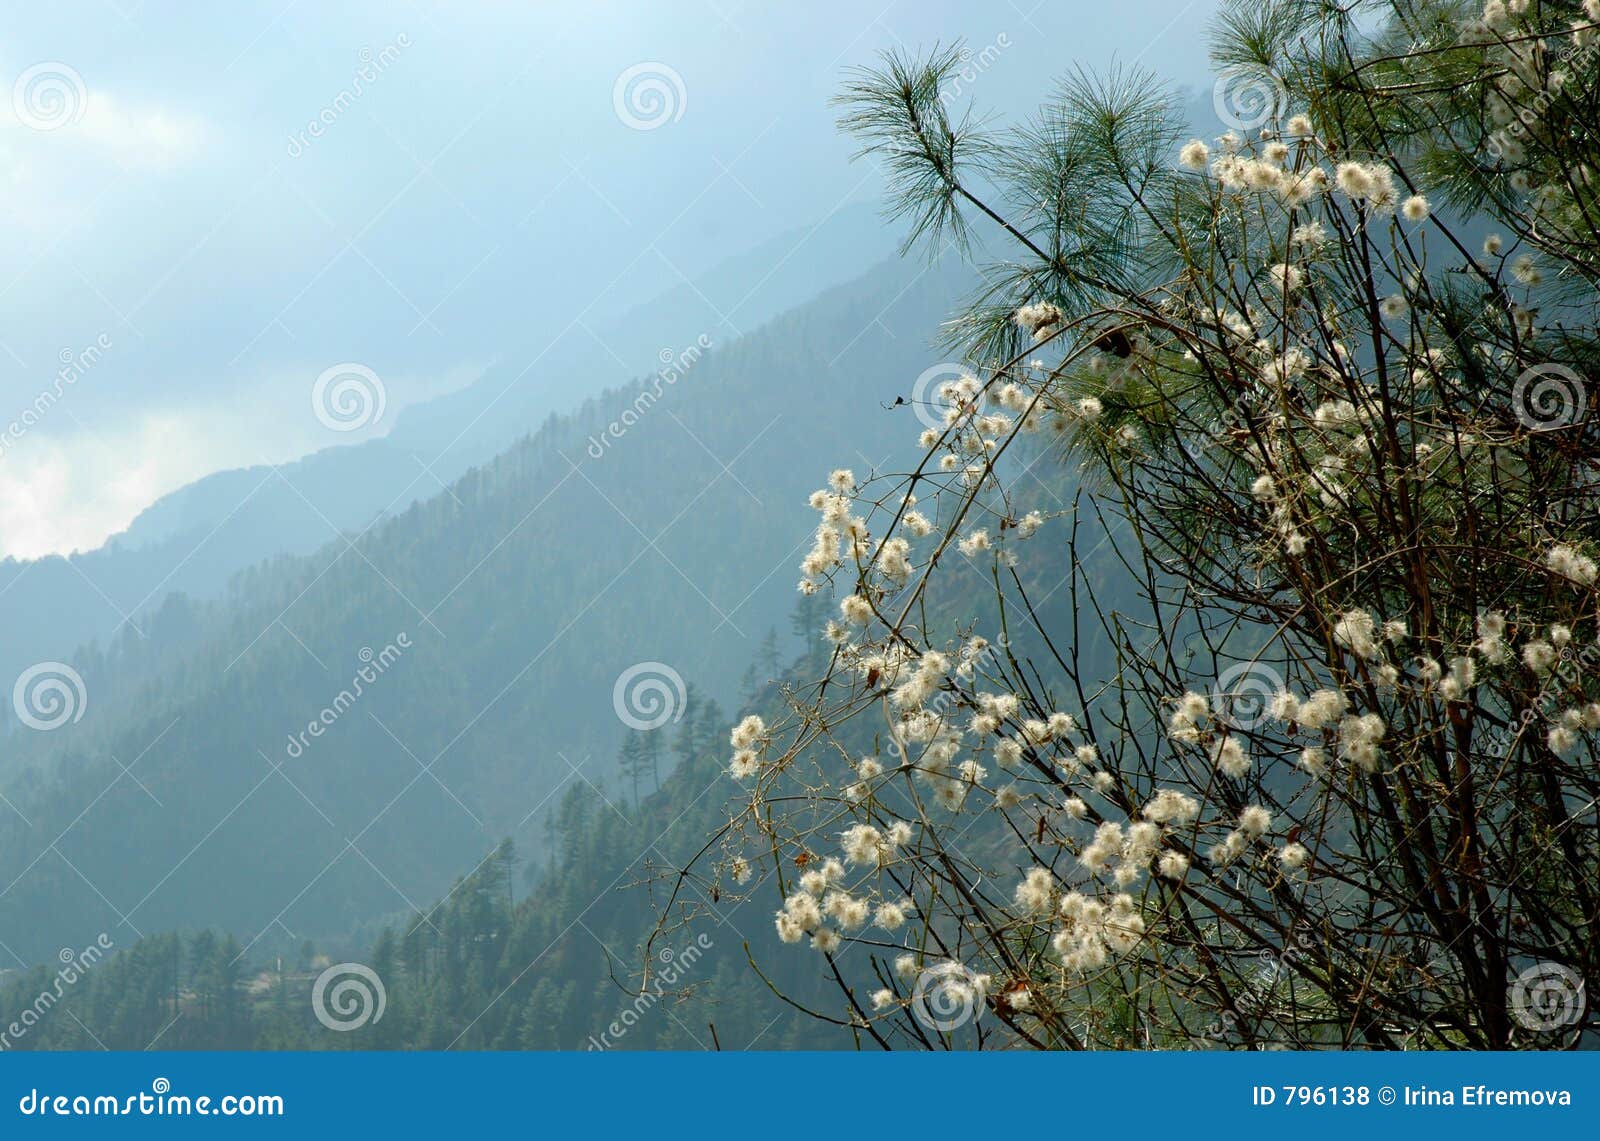 spring in the himalayas